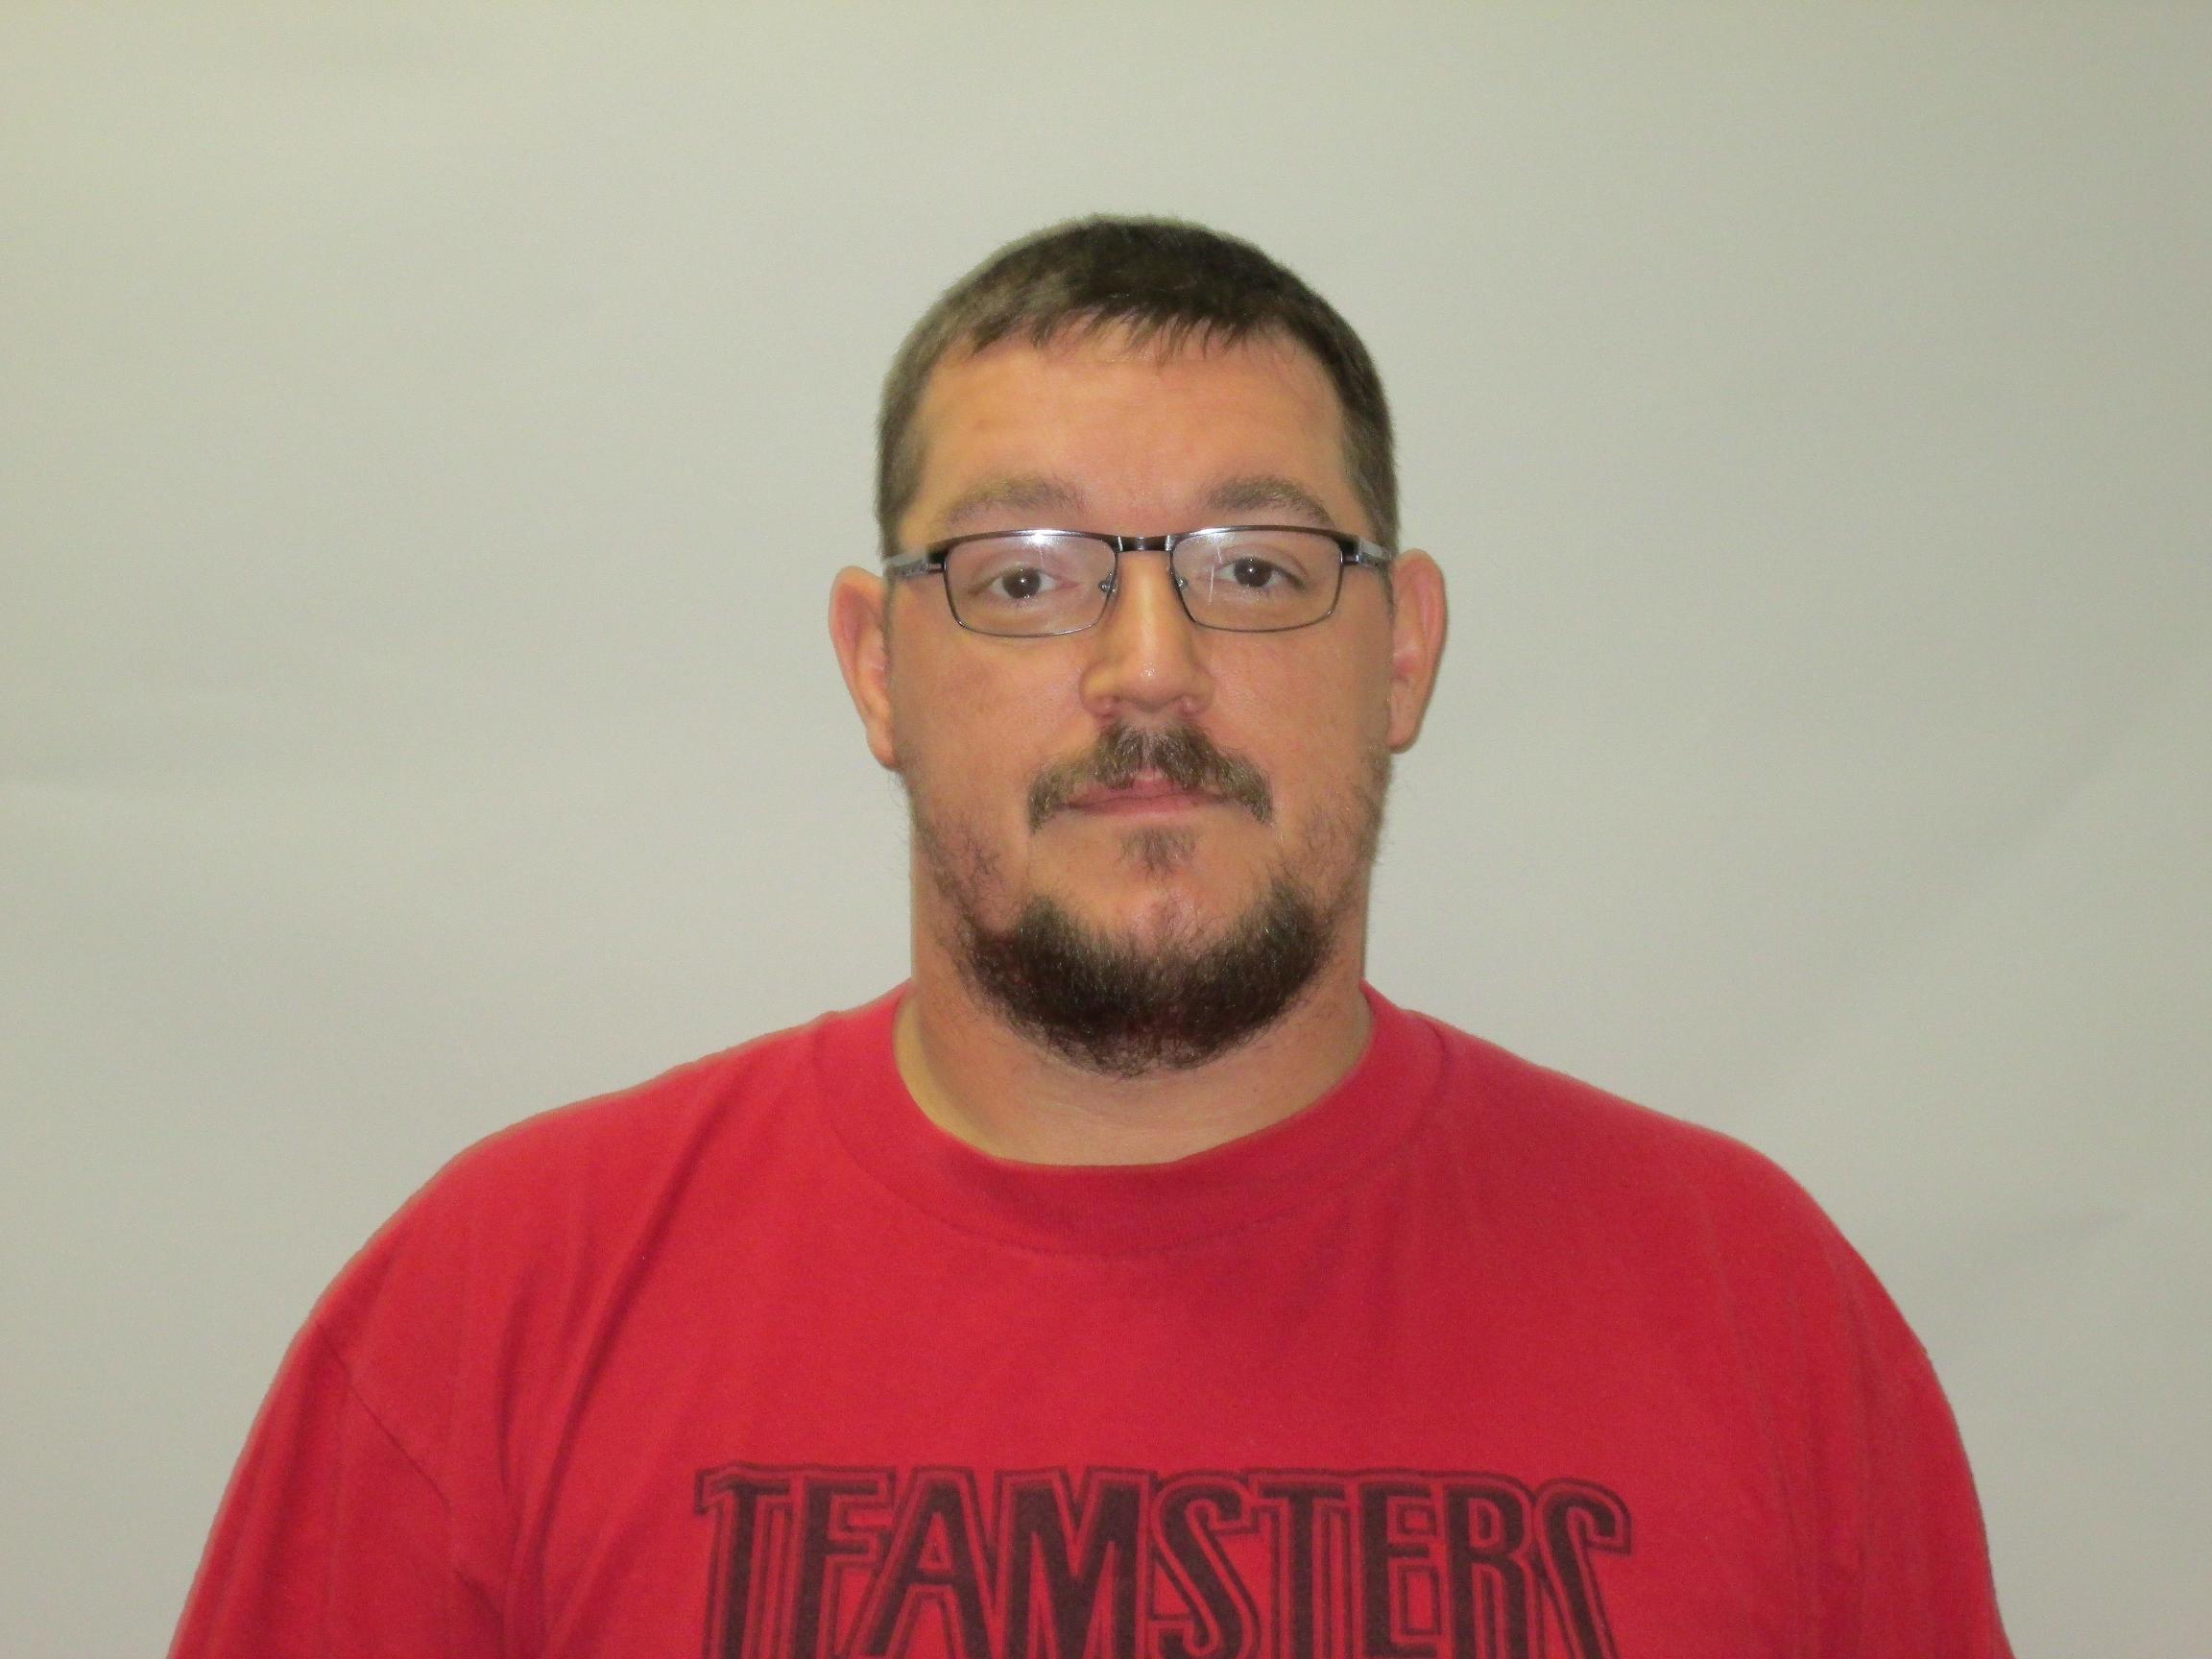 offender-information-kentucky-department-of-corrections-offender-online-lookup-system